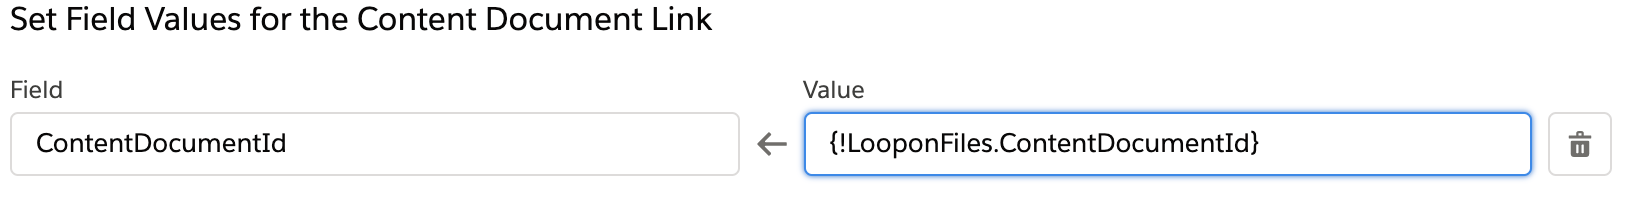 How to Use Loops in A Salesforce Flow?